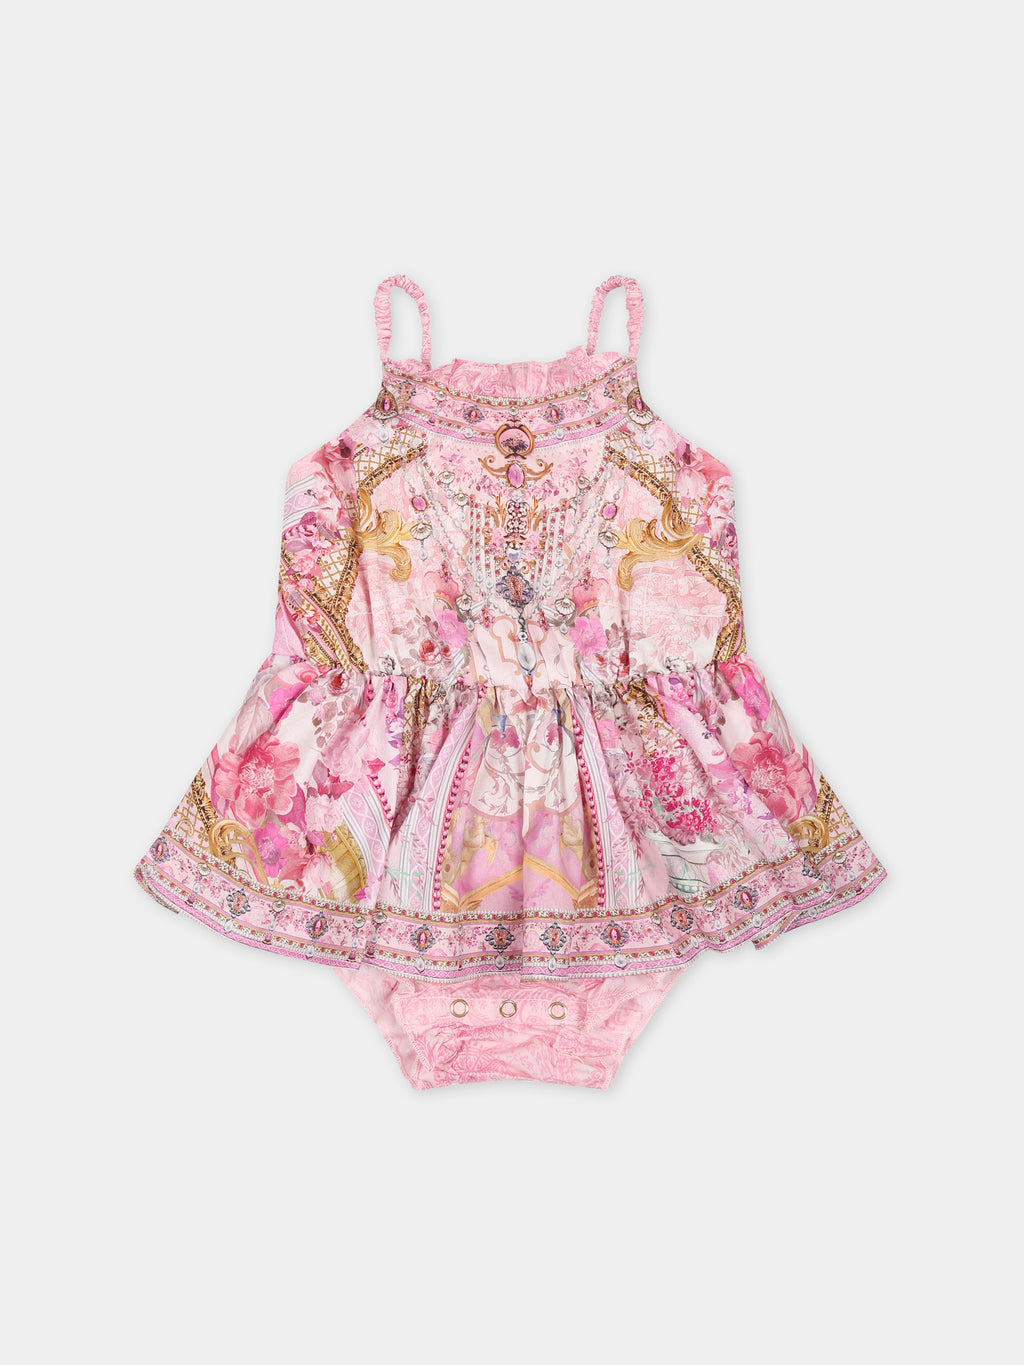 Pink romper for baby girl with floral print